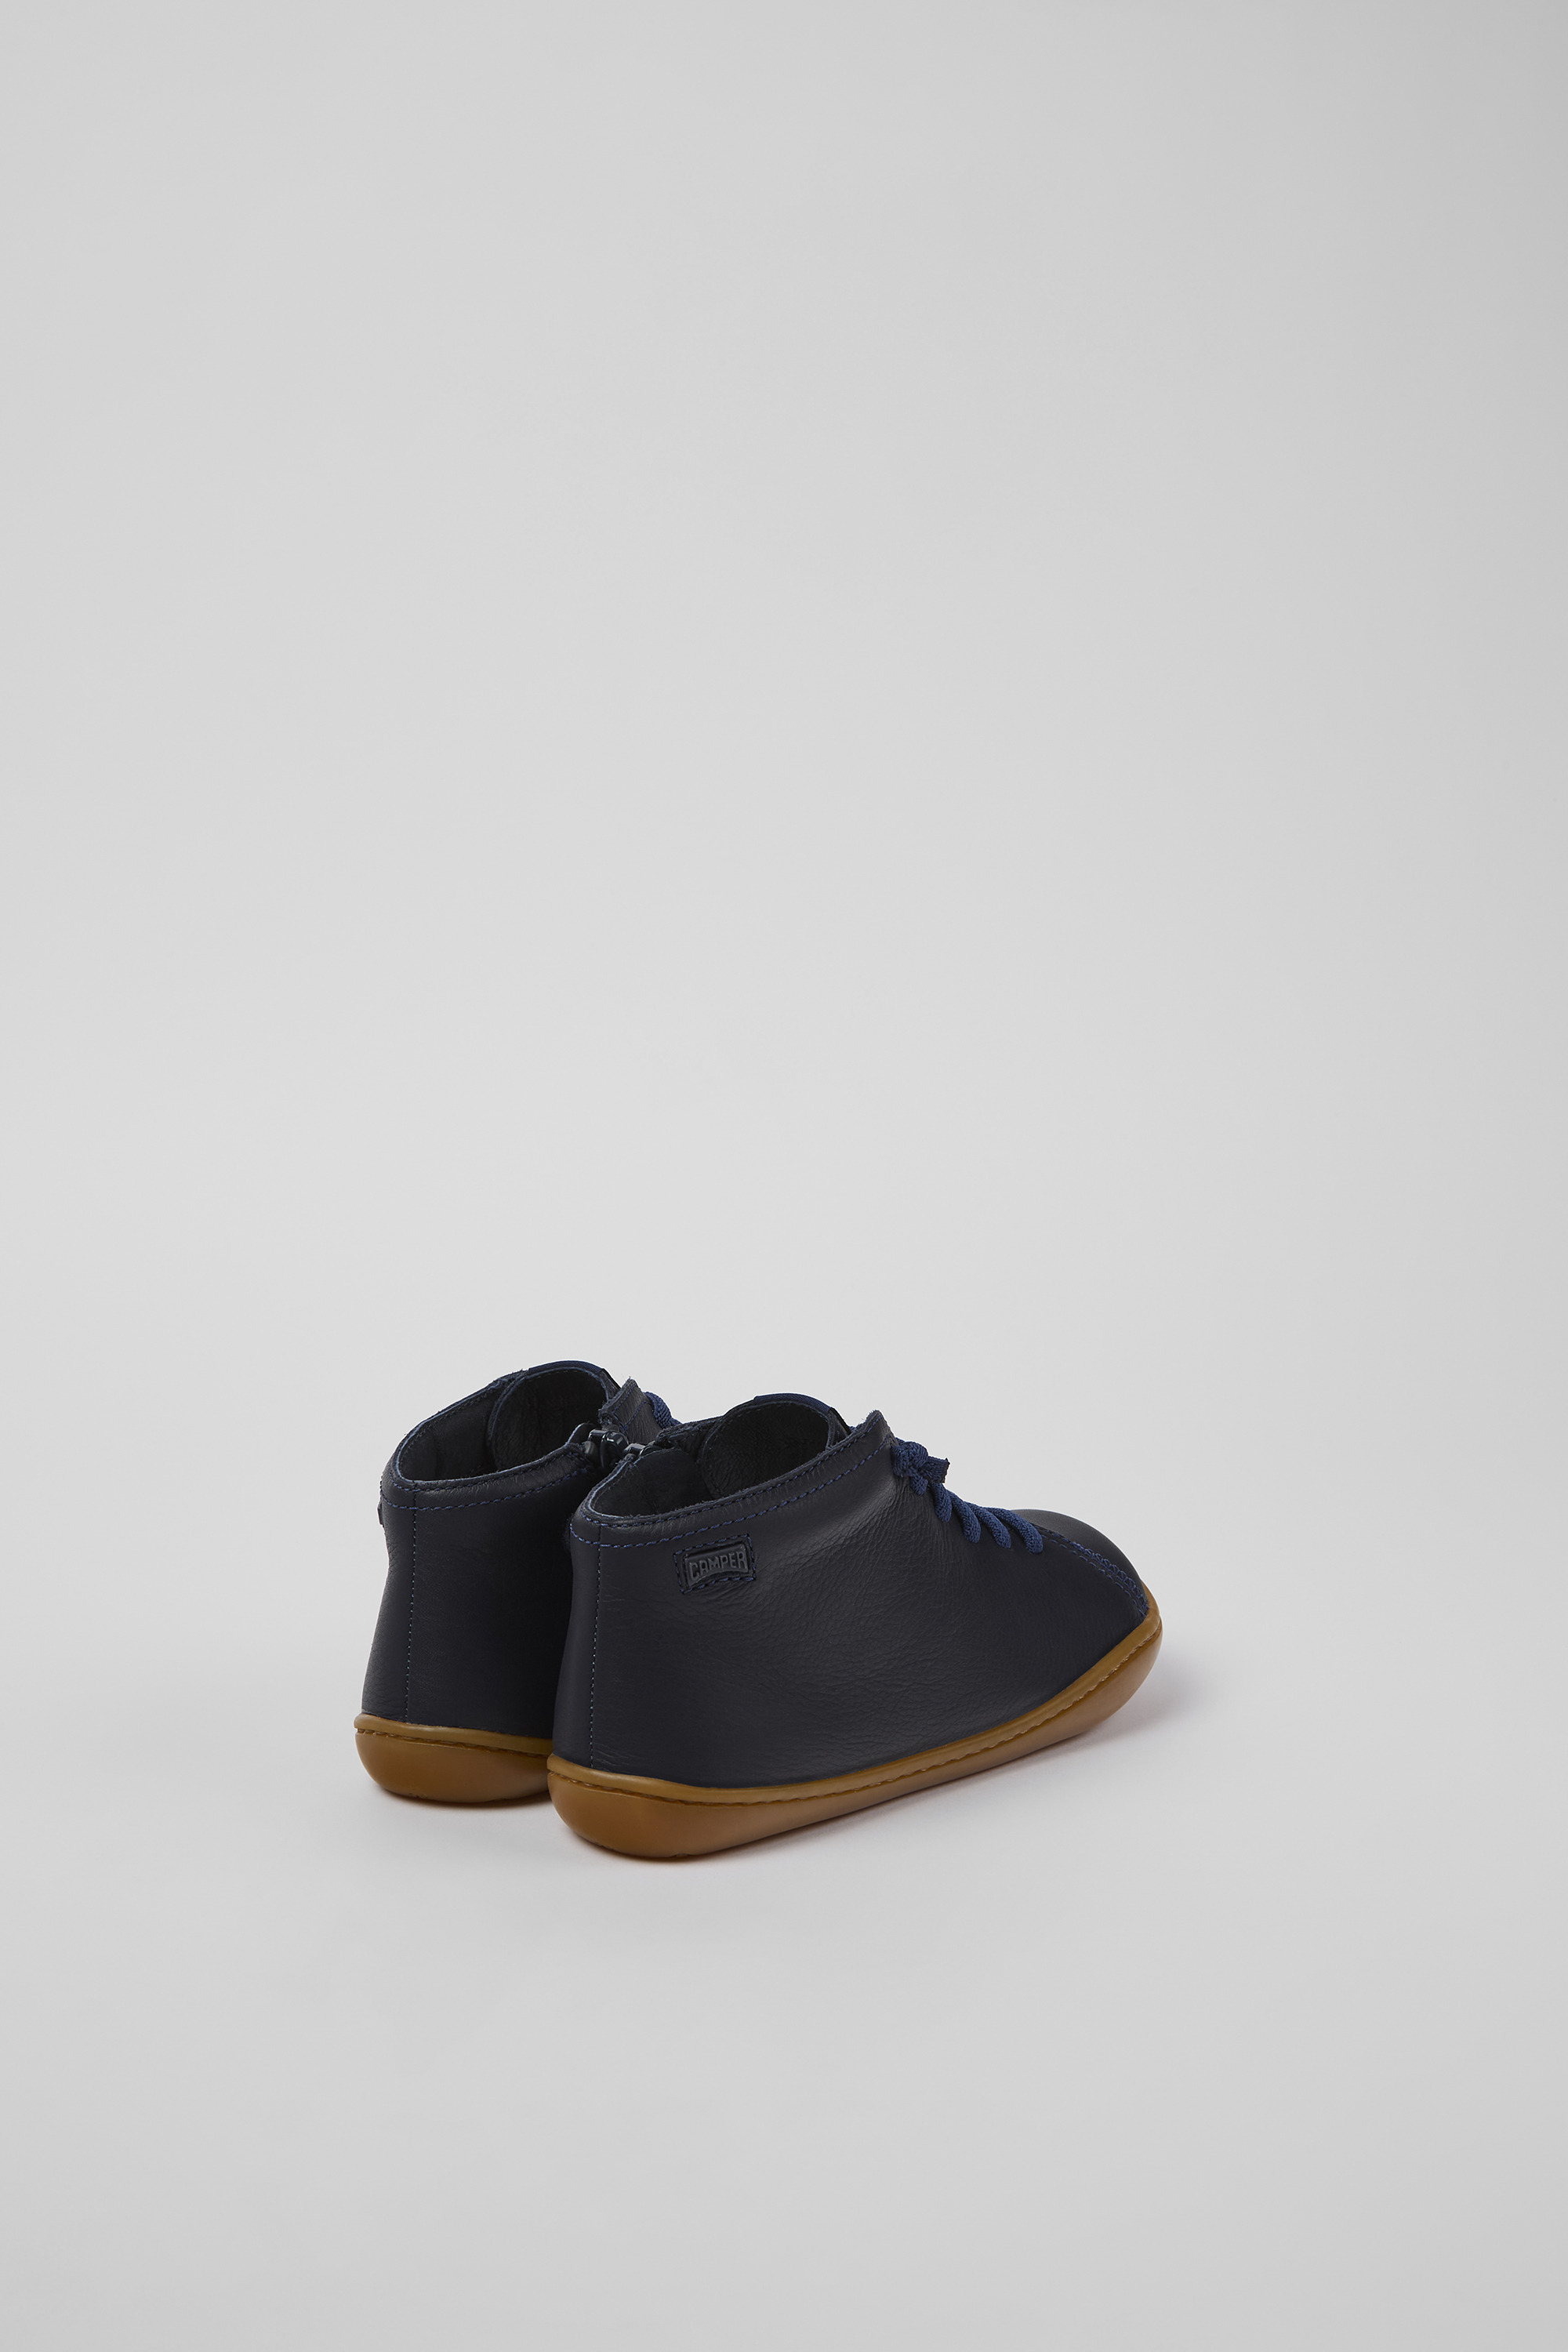 Peu Blue Boots for Kids - Fall/Winter collection - Camper USA